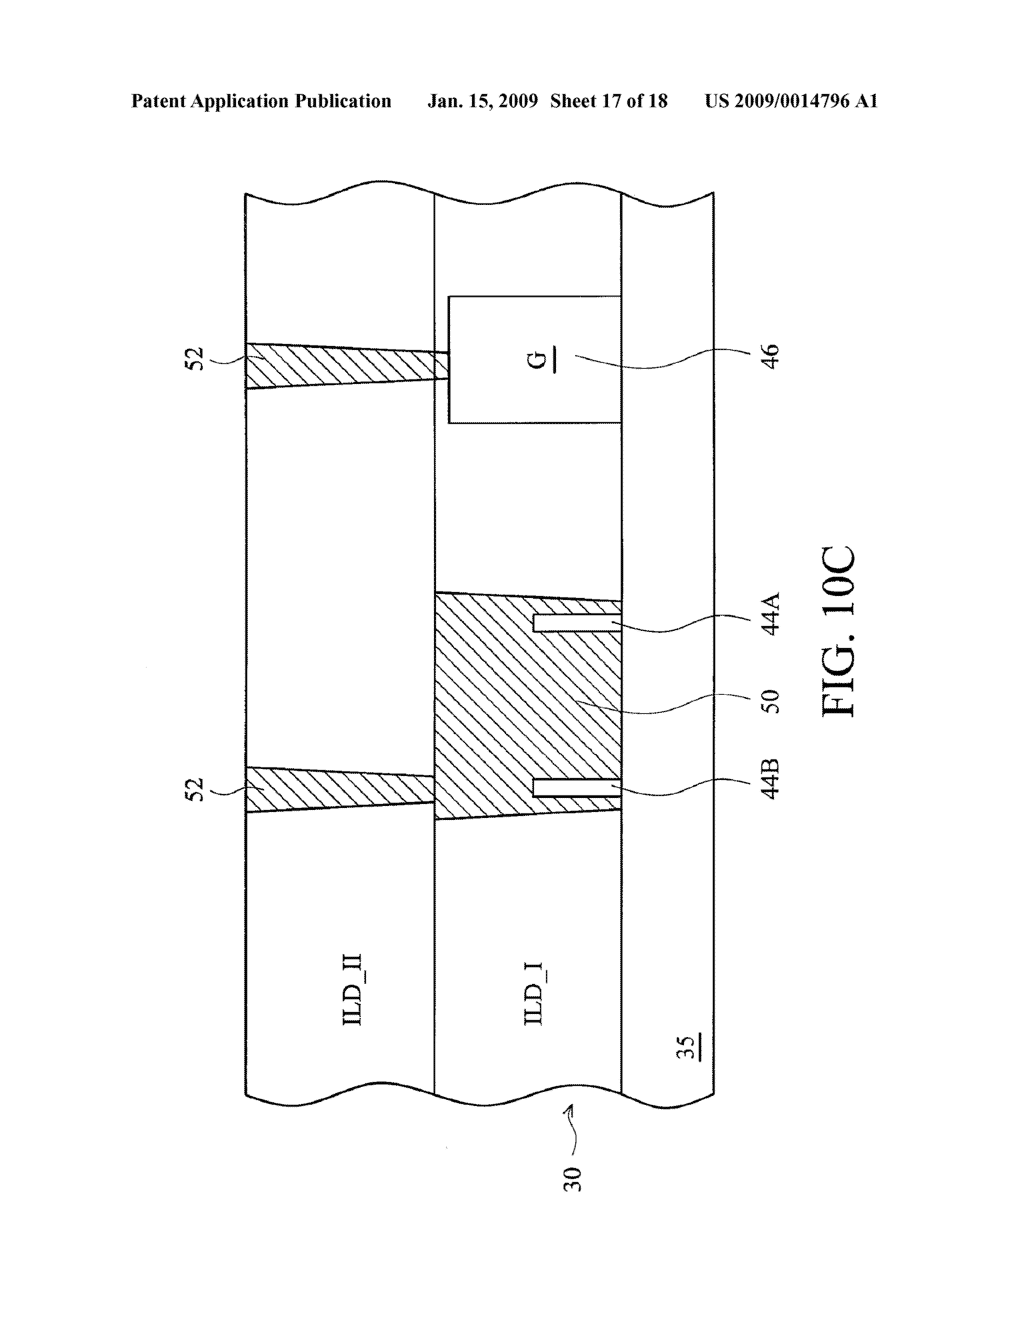 Semiconductor Device with Improved Contact Structure and Method of Forming Same - diagram, schematic, and image 18